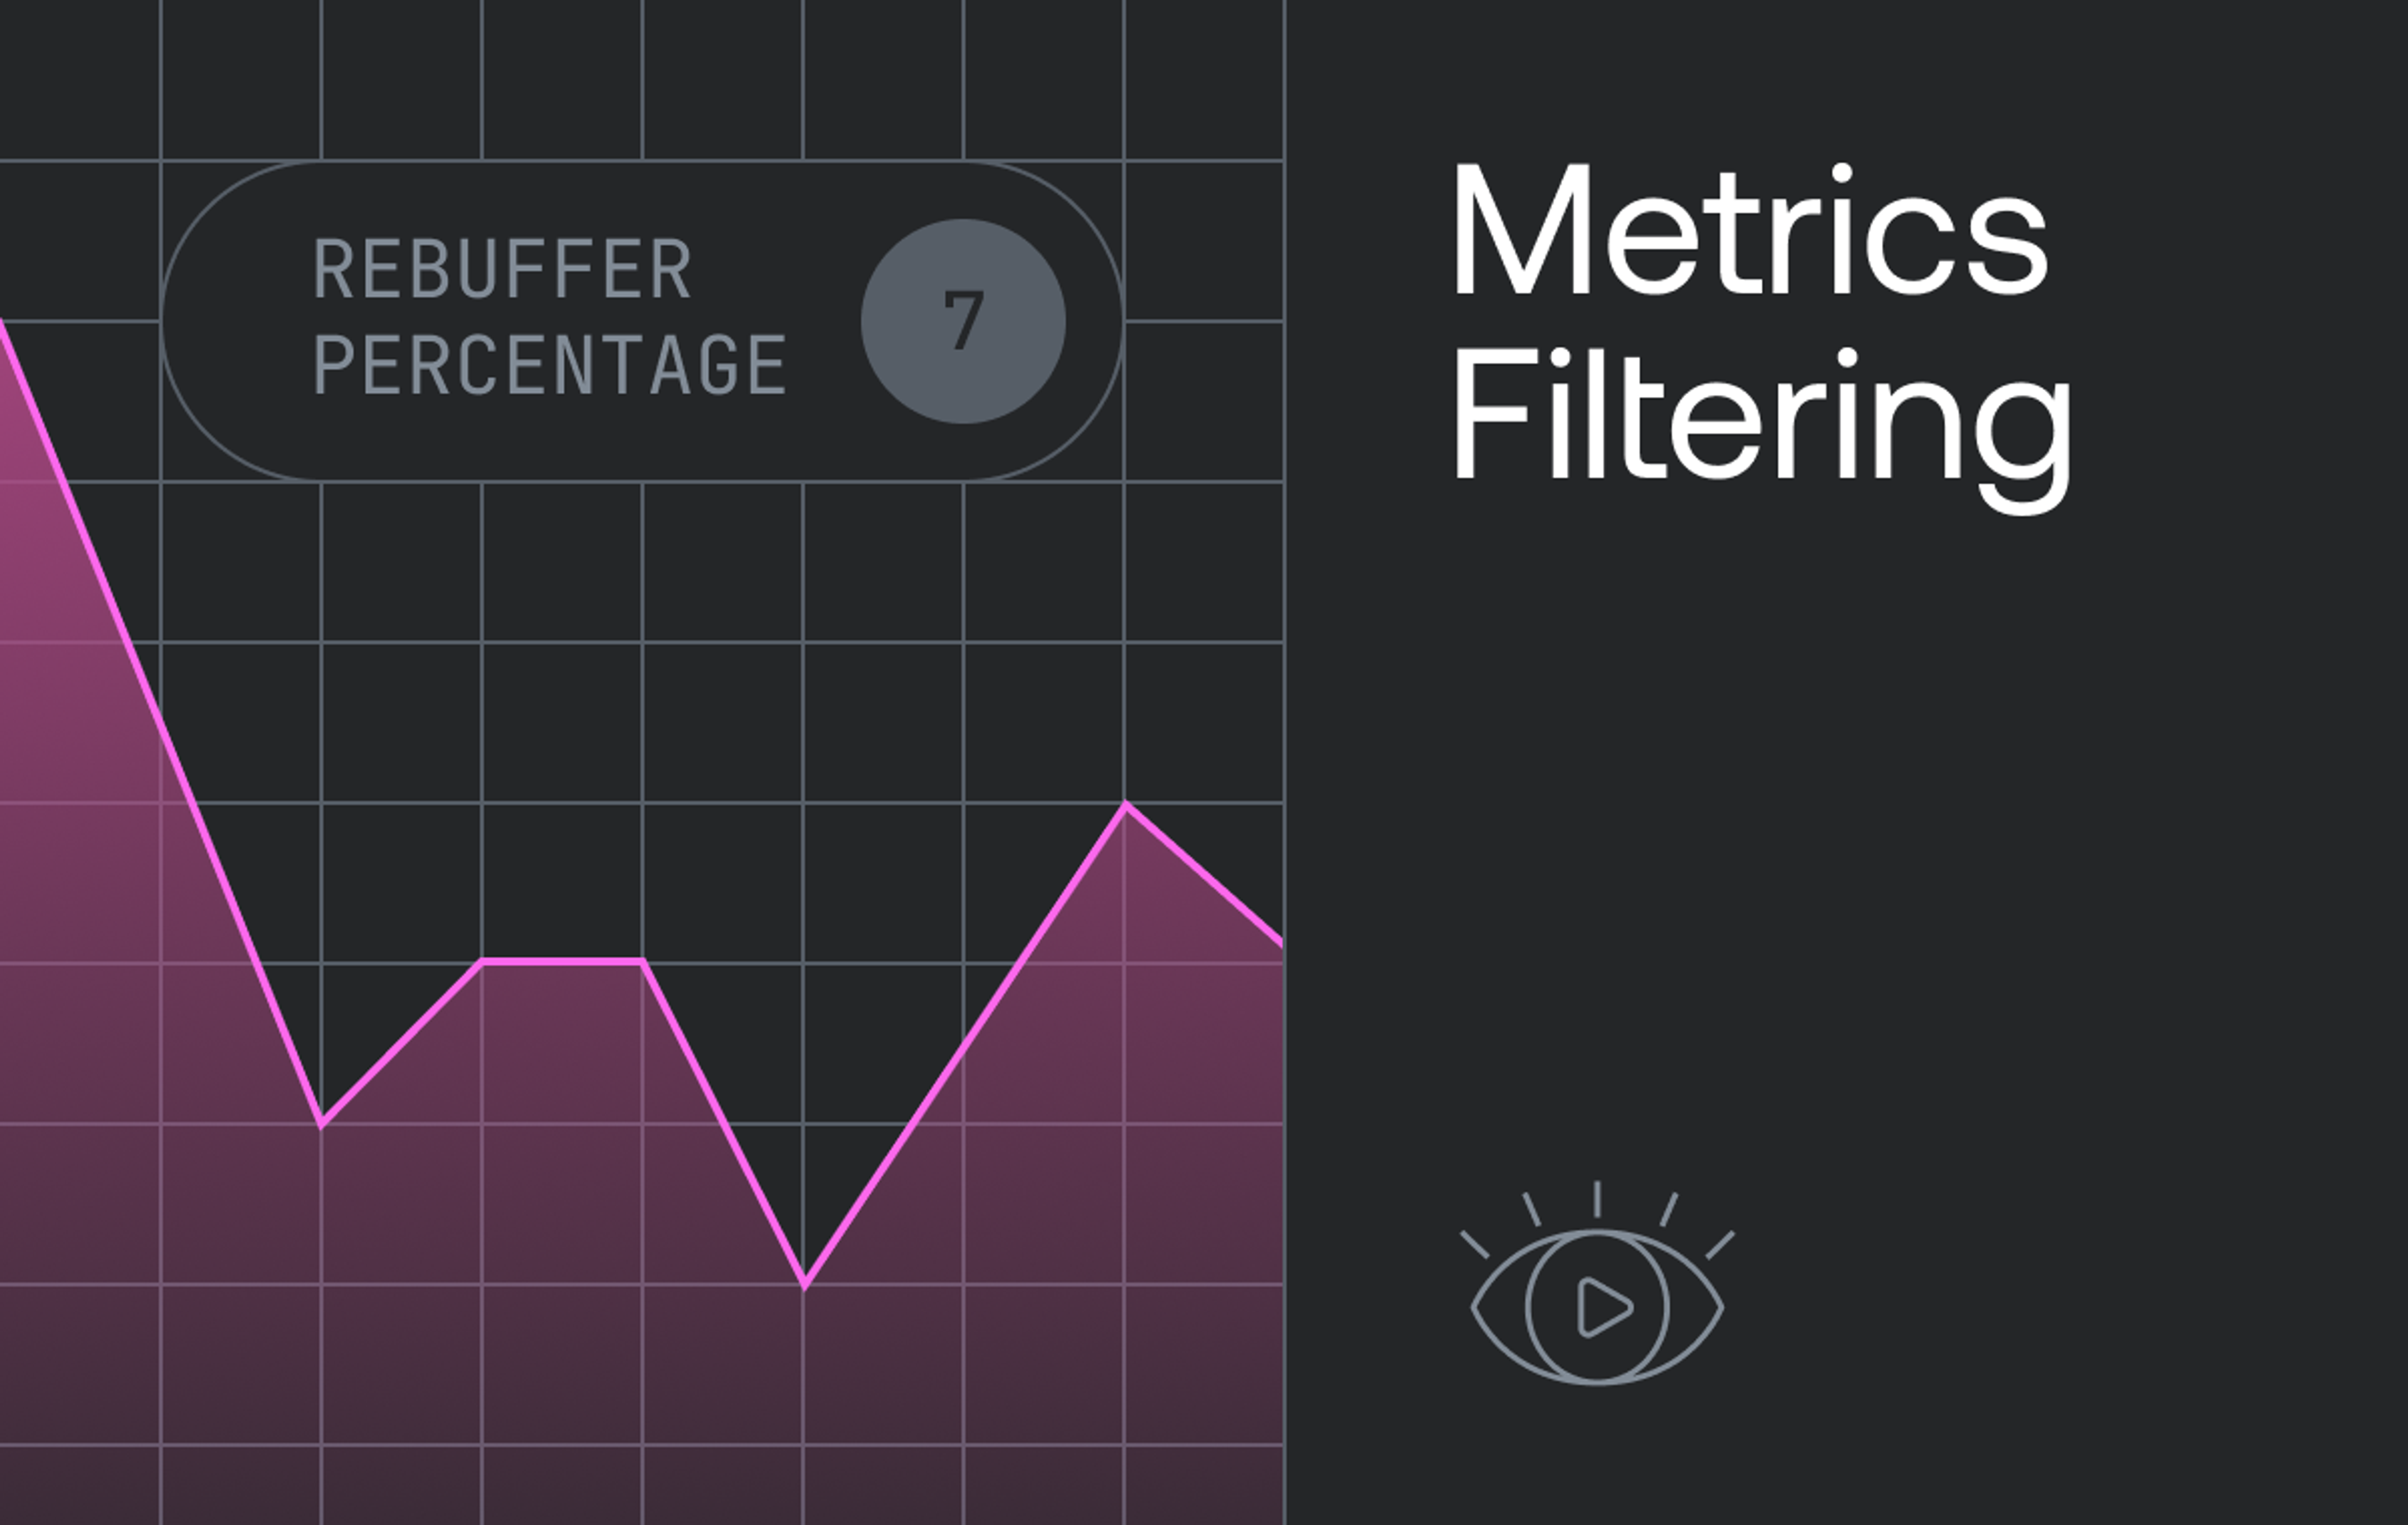 Chart representing Rebuffering Percentage and to the right the words Metrics Filtering